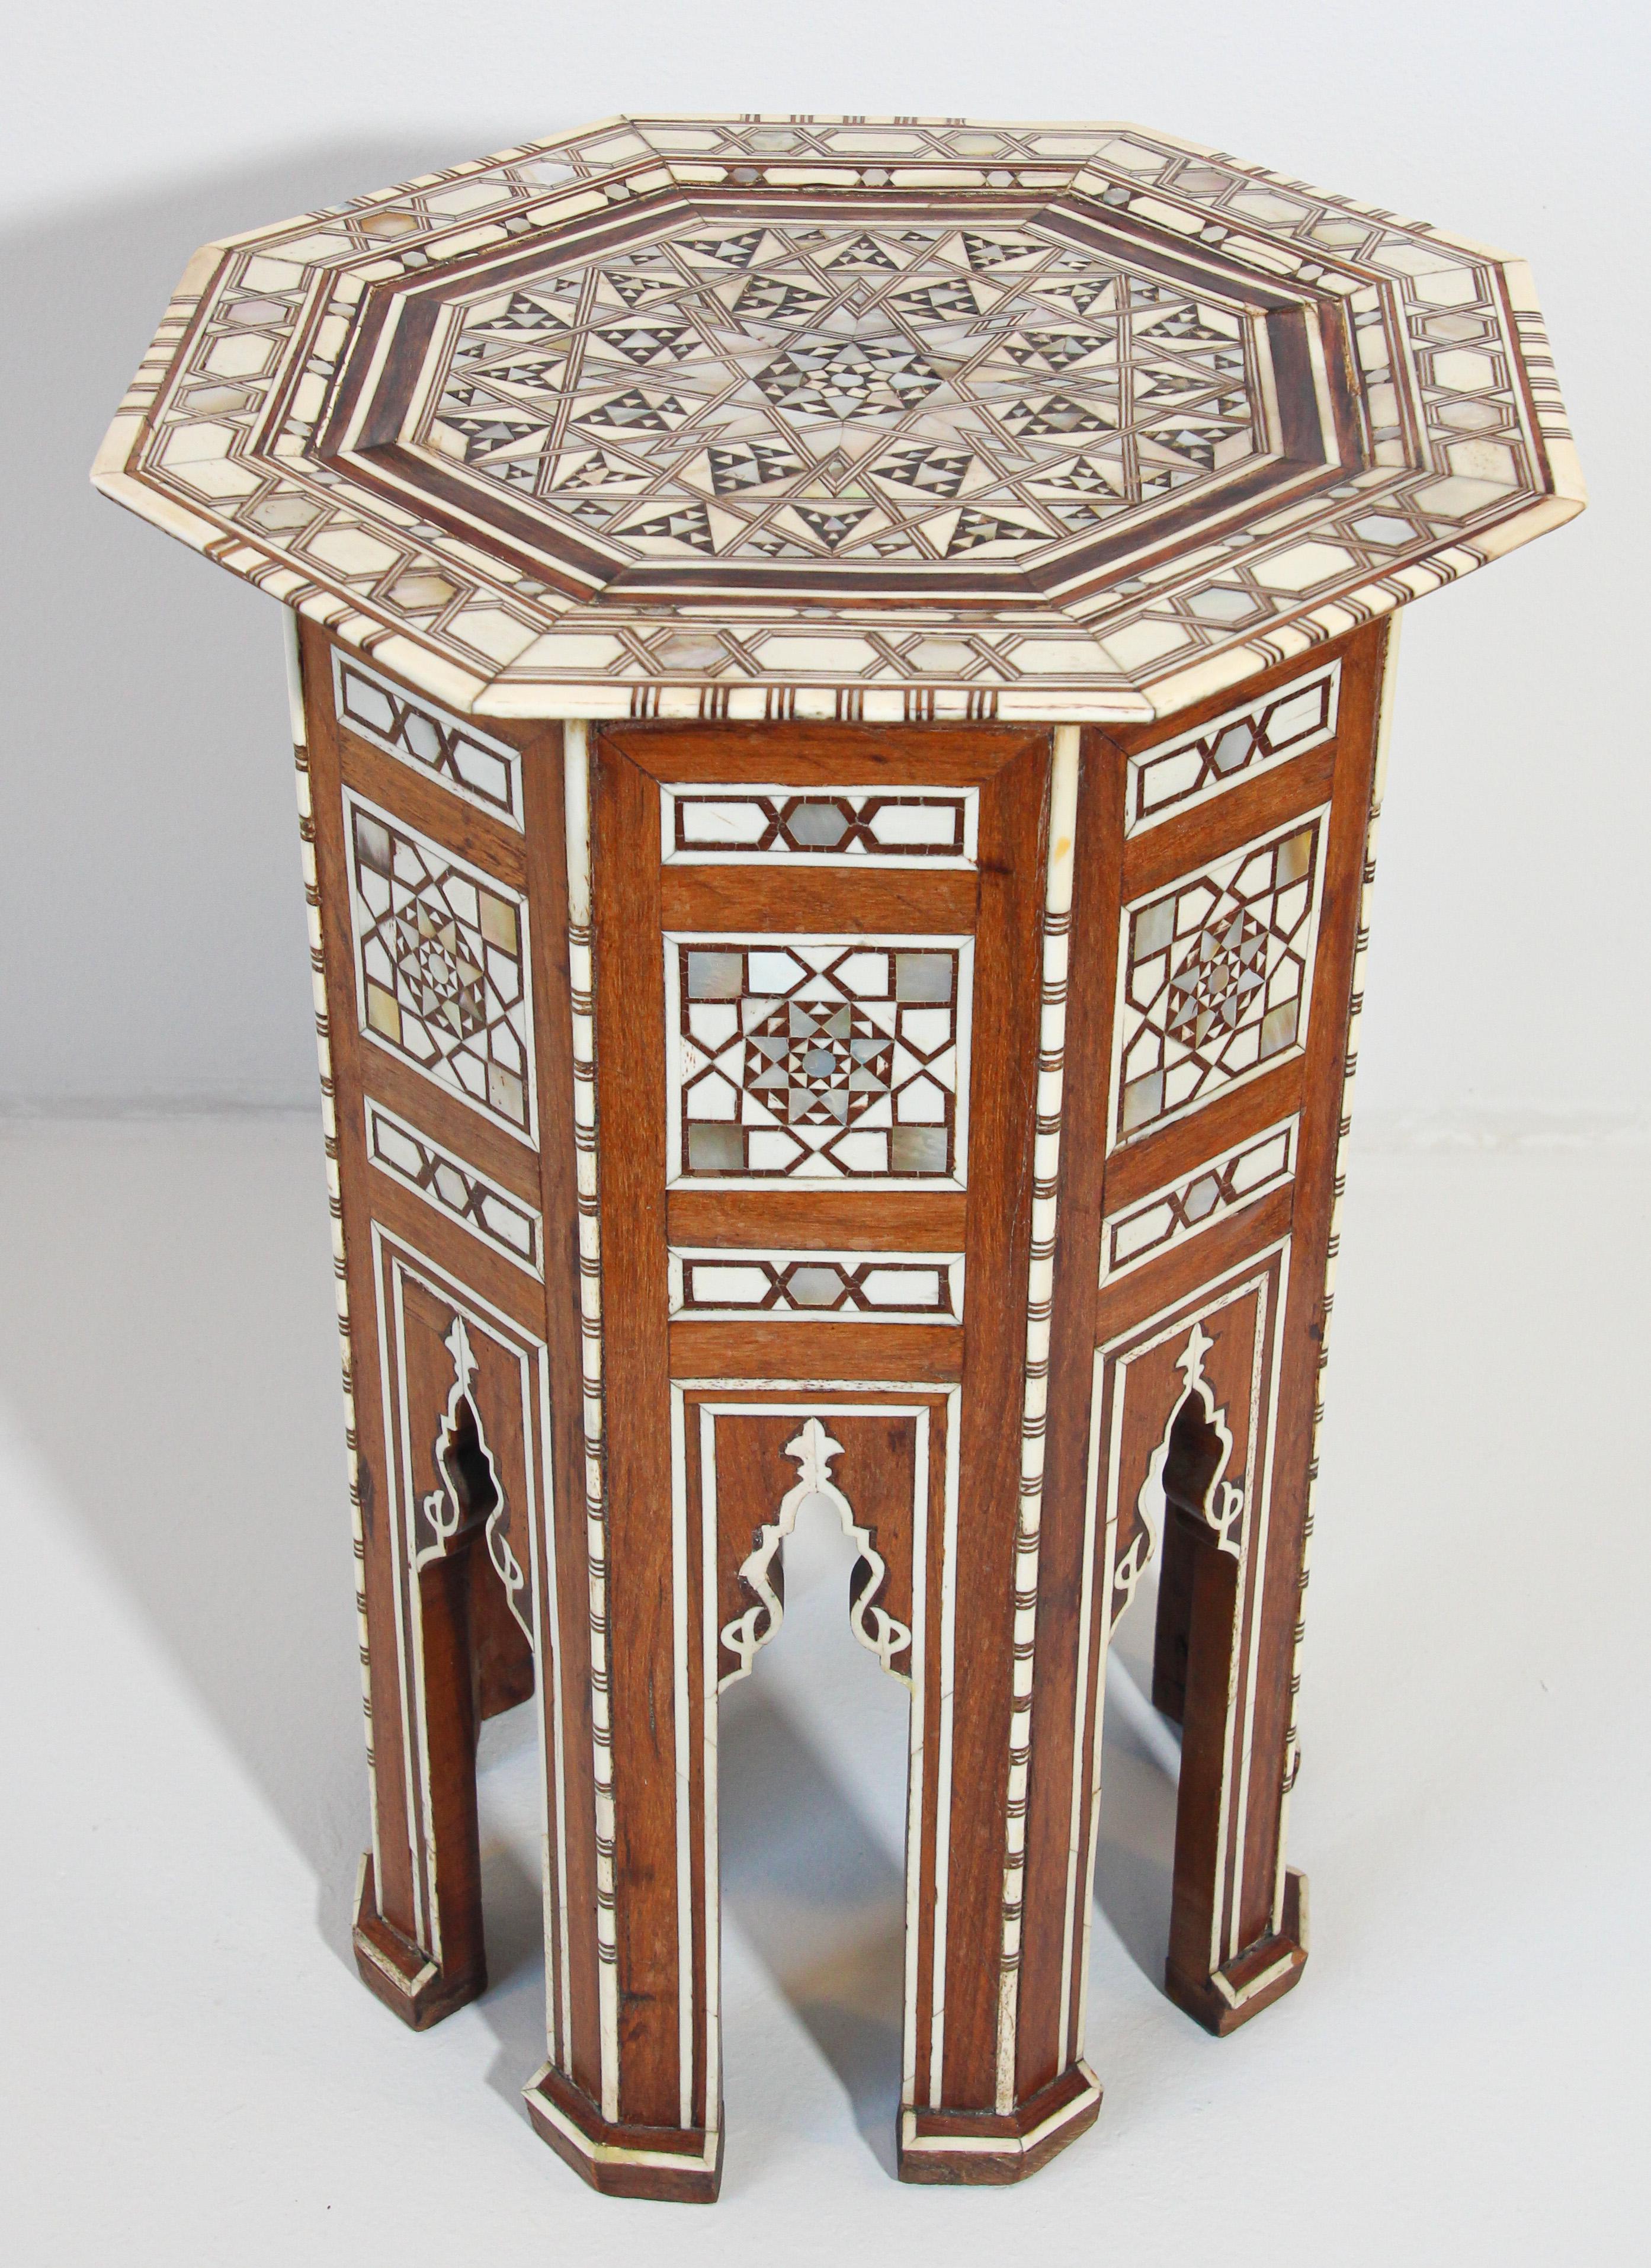 Gorgeous, Moorish style, one of kind 19th century antique Middle Eastern Egyptian, Syrian or Lebanese octagonal pedestal table inlaid with bone and precious fruitwood.
Elegant fine antique Moorish side table with intricate mosaic marquetry work in